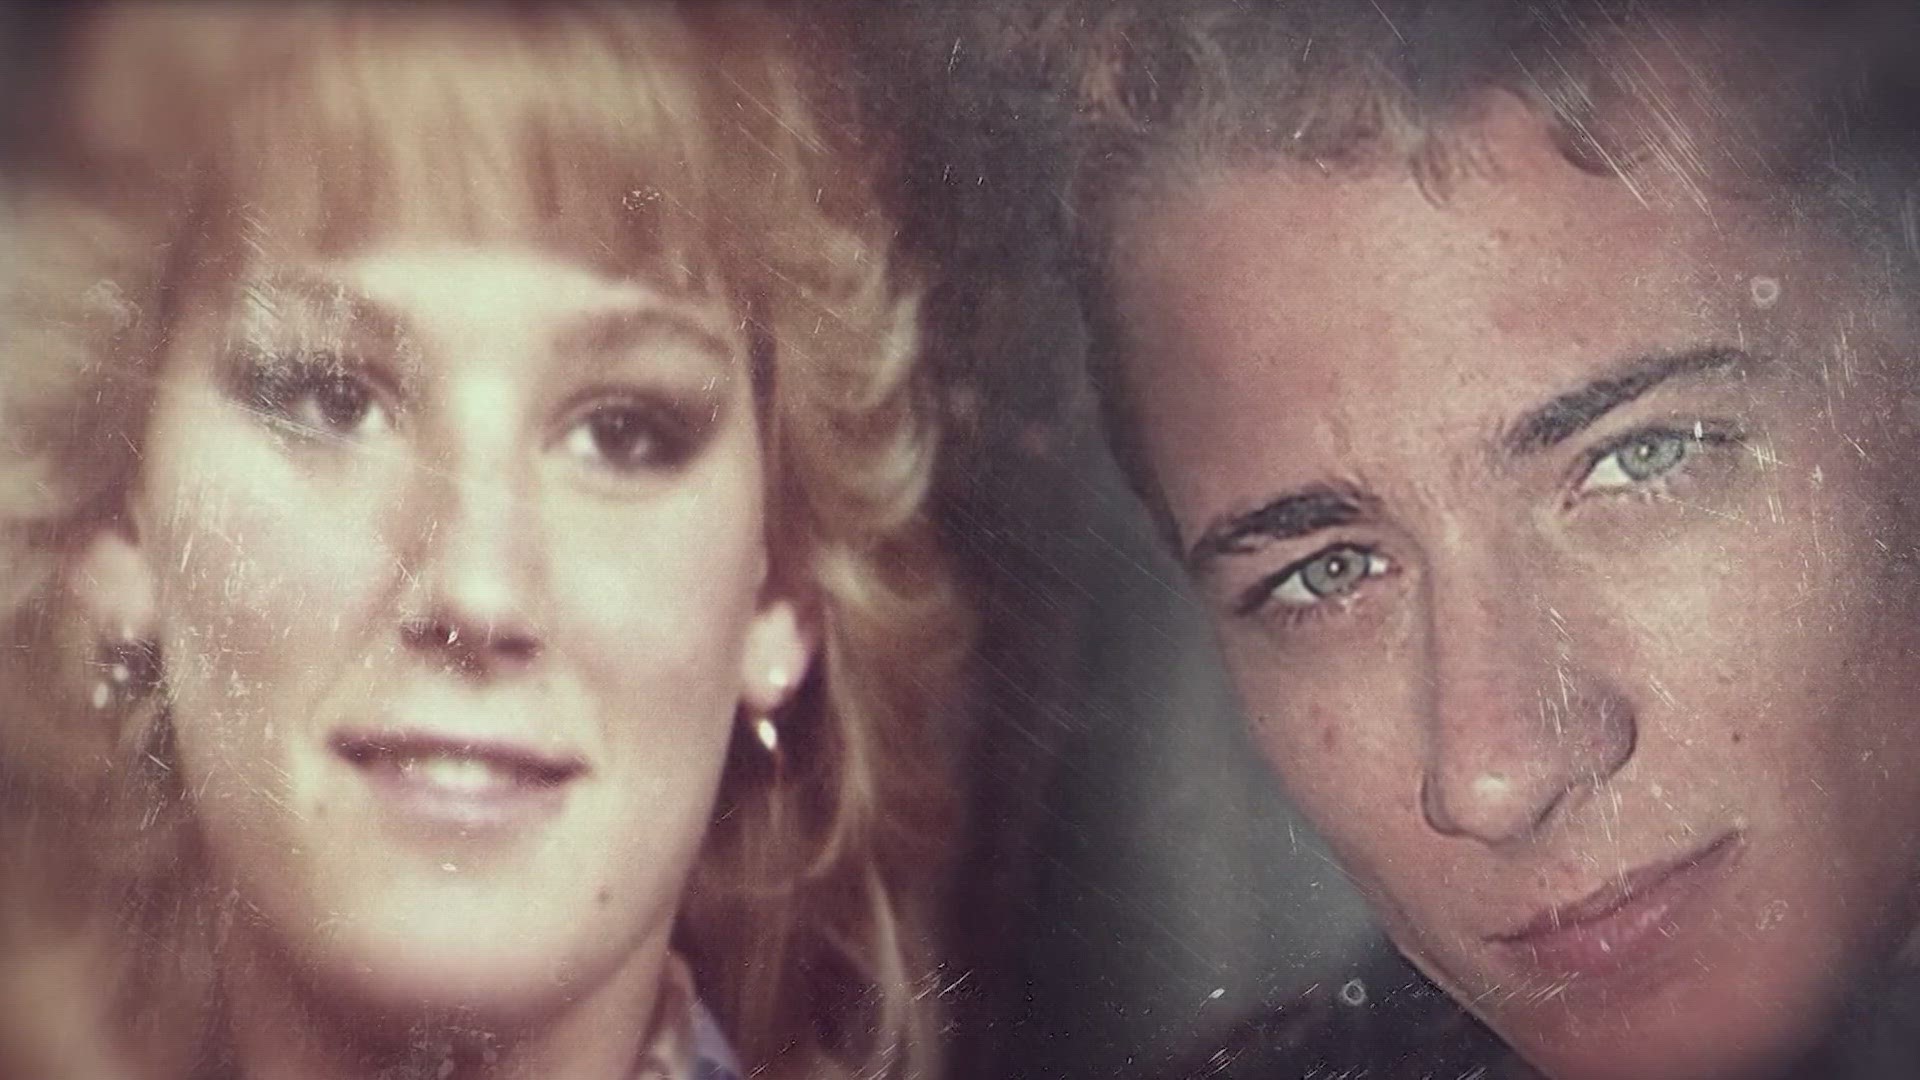 Cheryl was raped and her throat was slit in 1990. Andy was tied to a tree and nearly decapitated. It's a cold case that has haunted two families for decades.